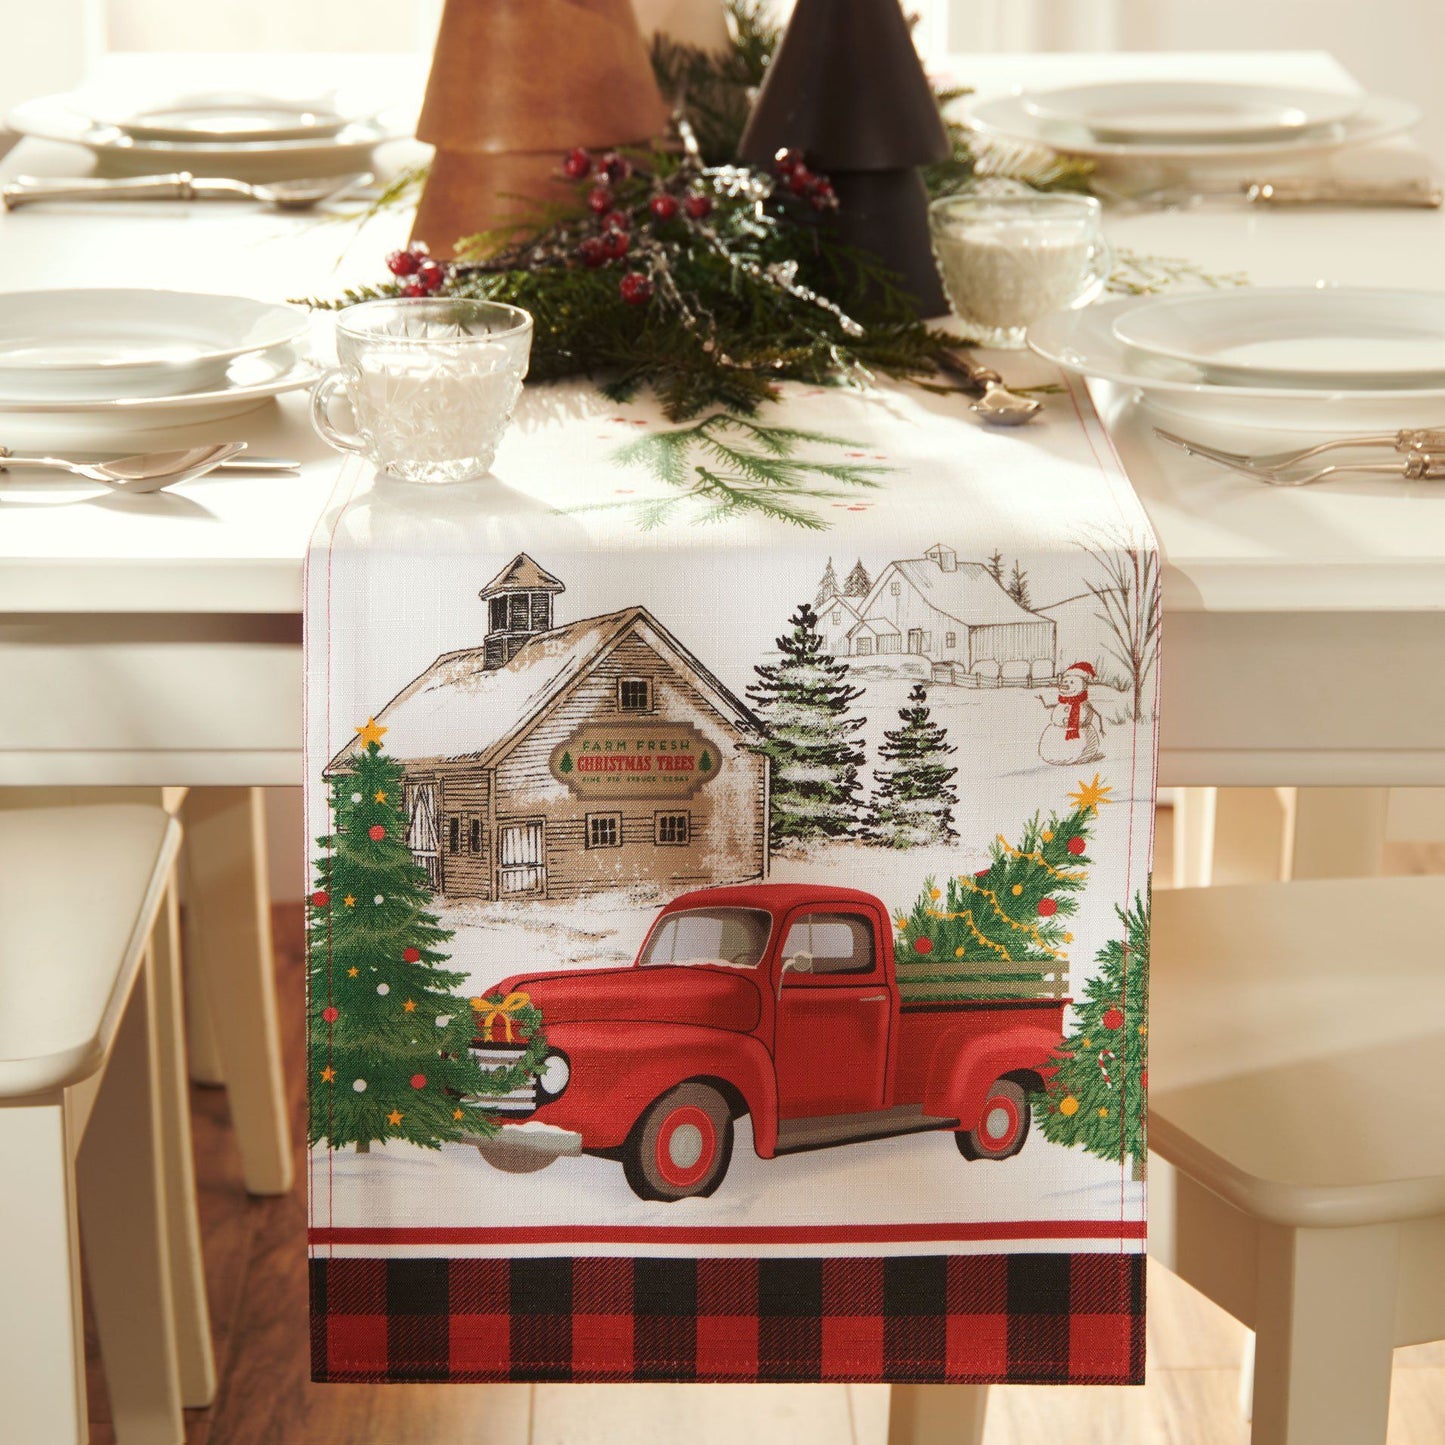 Table runner with vintage tree farm scene and rustic red farm truck on ends.  Sprigs of balm running down the center of runner.